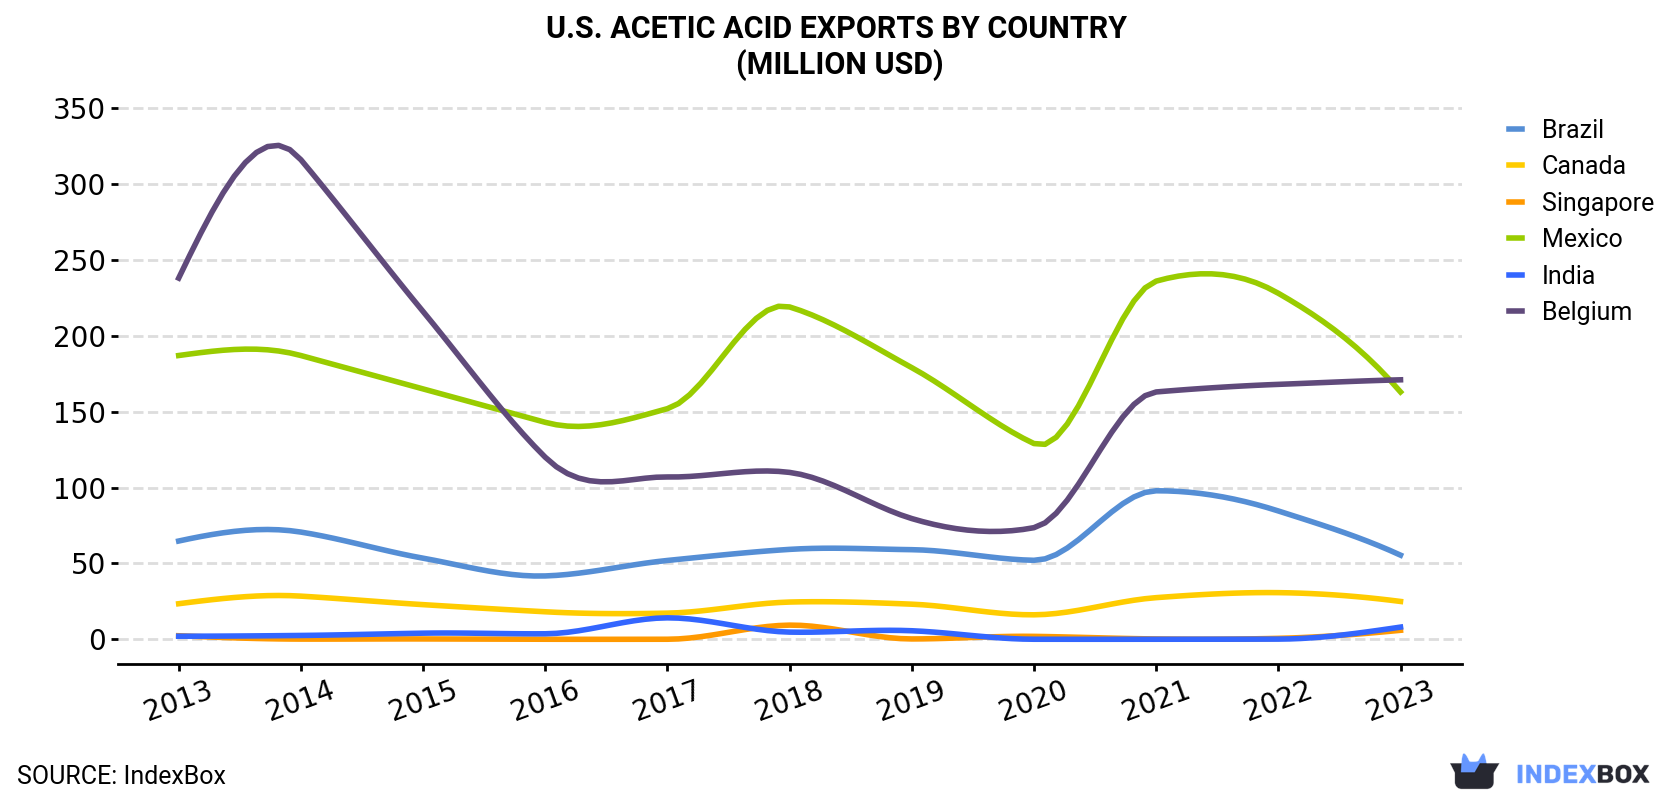 U.S. Acetic Acid Exports By Country (Million USD)